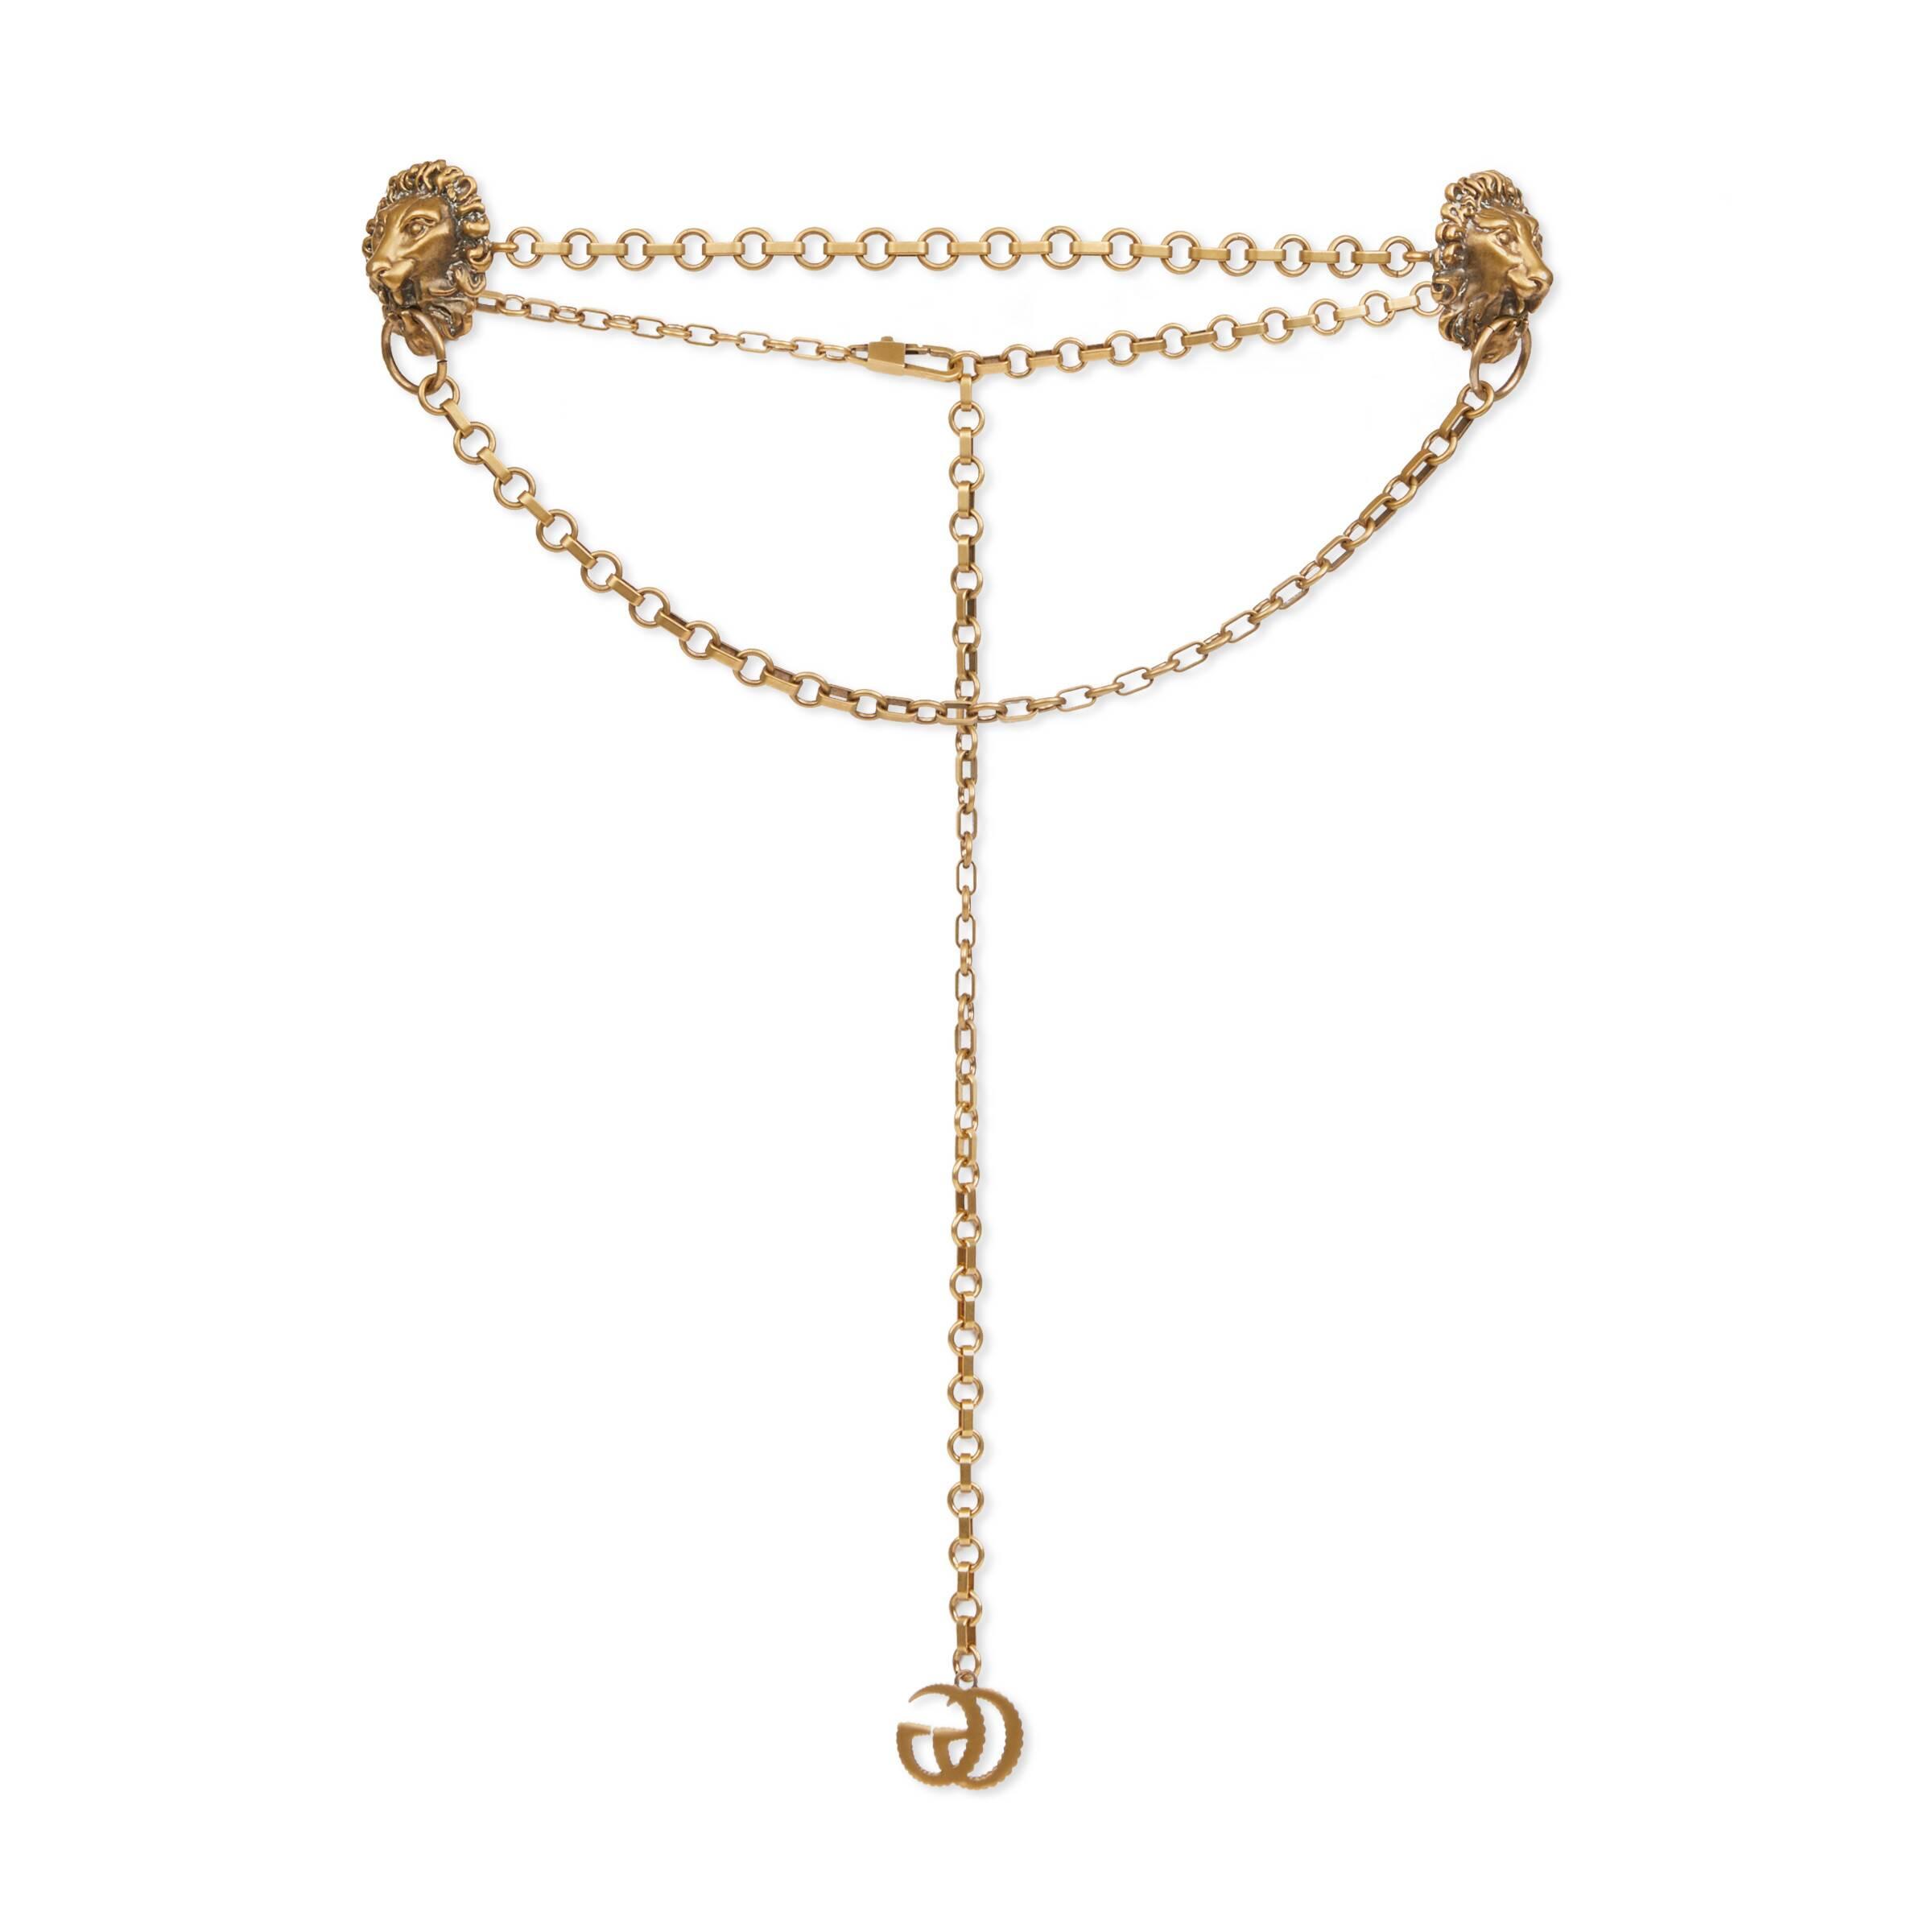 Gucci Chain Belt With Lion Heads in Metallic | Lyst